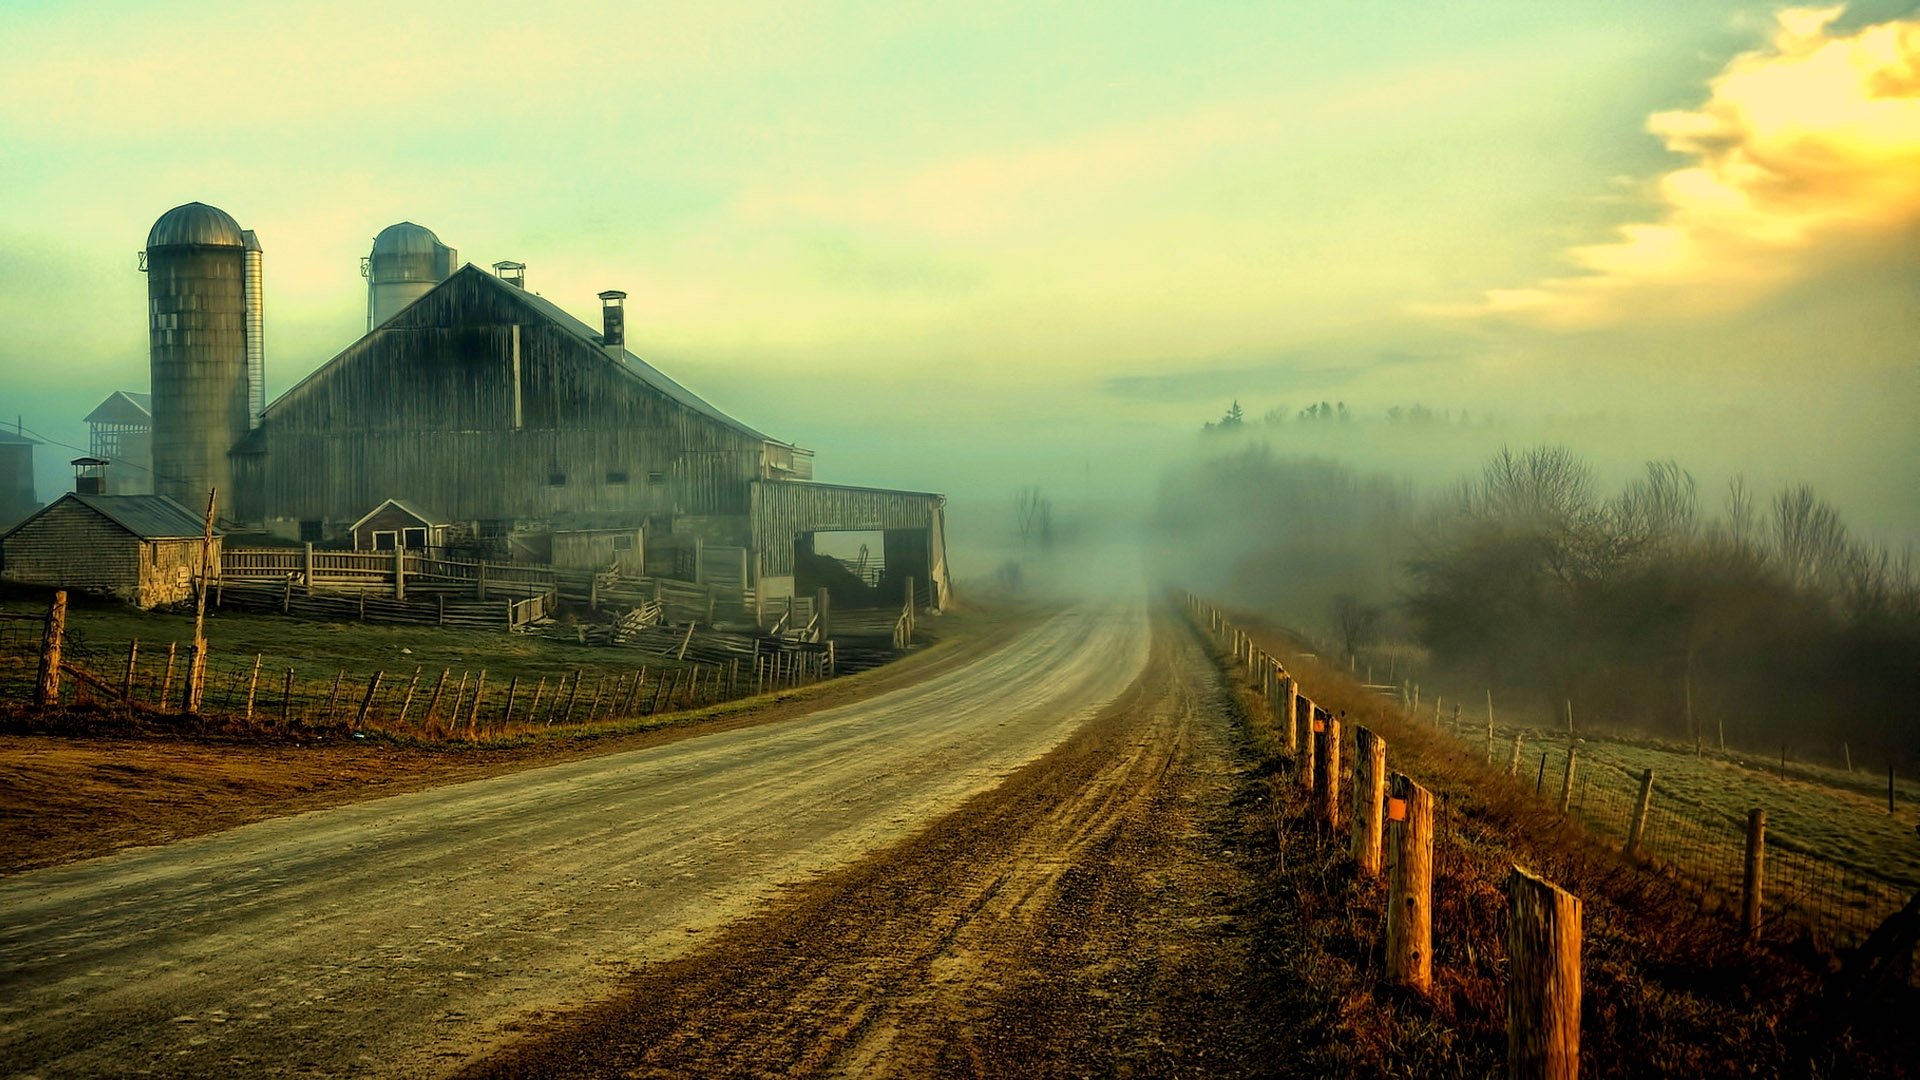  rustic roads fence sky clouds houses barn farm wallpaper background 1920x1080